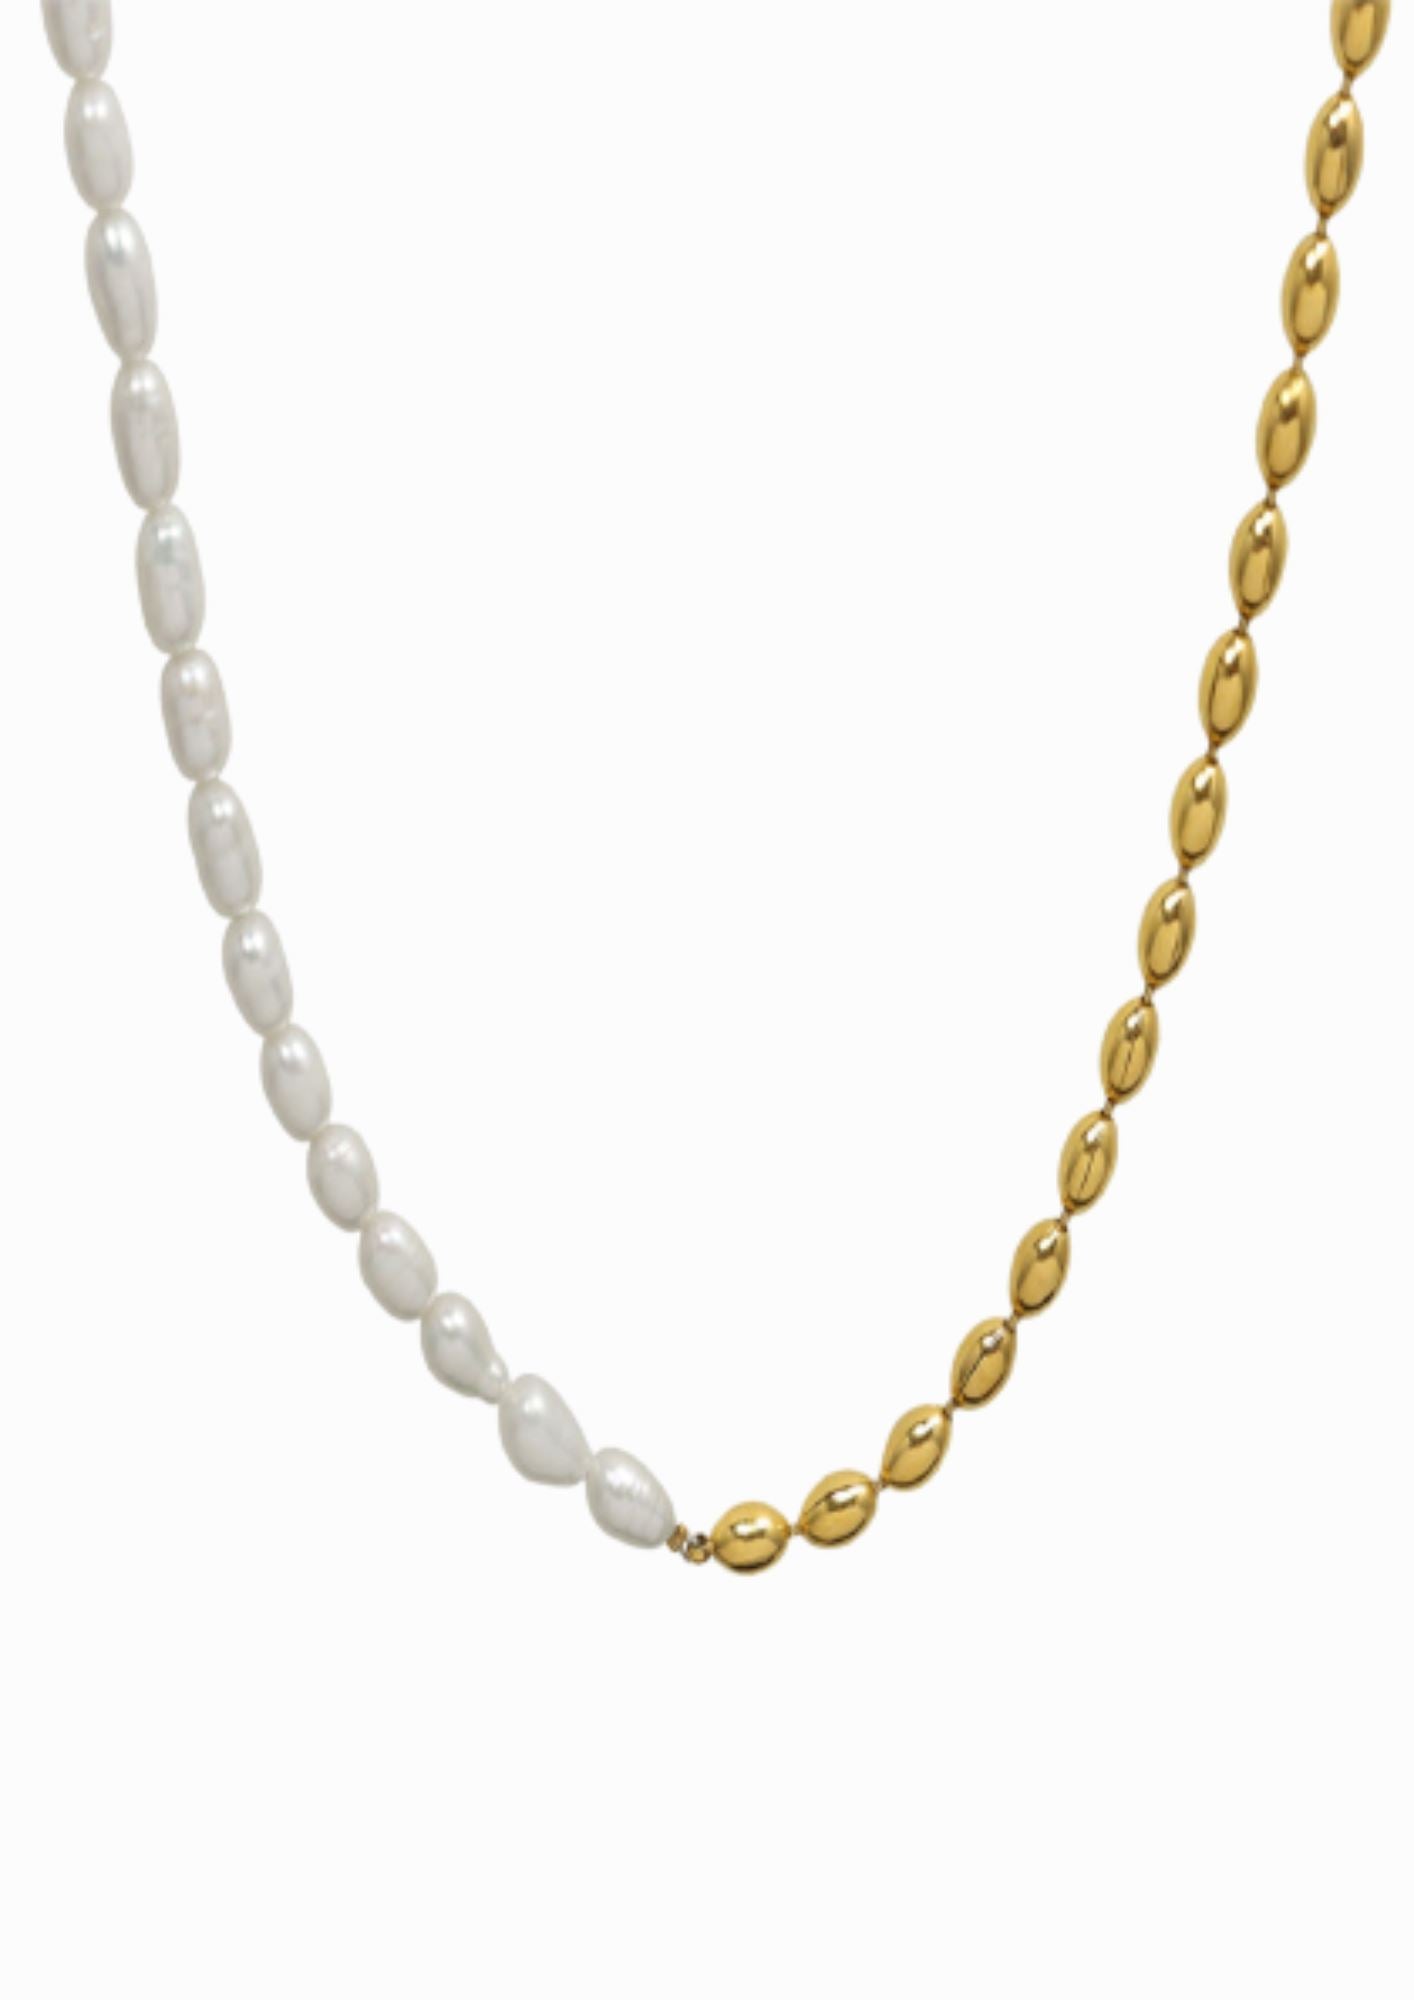 MECHANICAL PEARL NECKLACE neck Yubama Jewelry Online Store - The Elegant Designs of Gold and Silver ! 